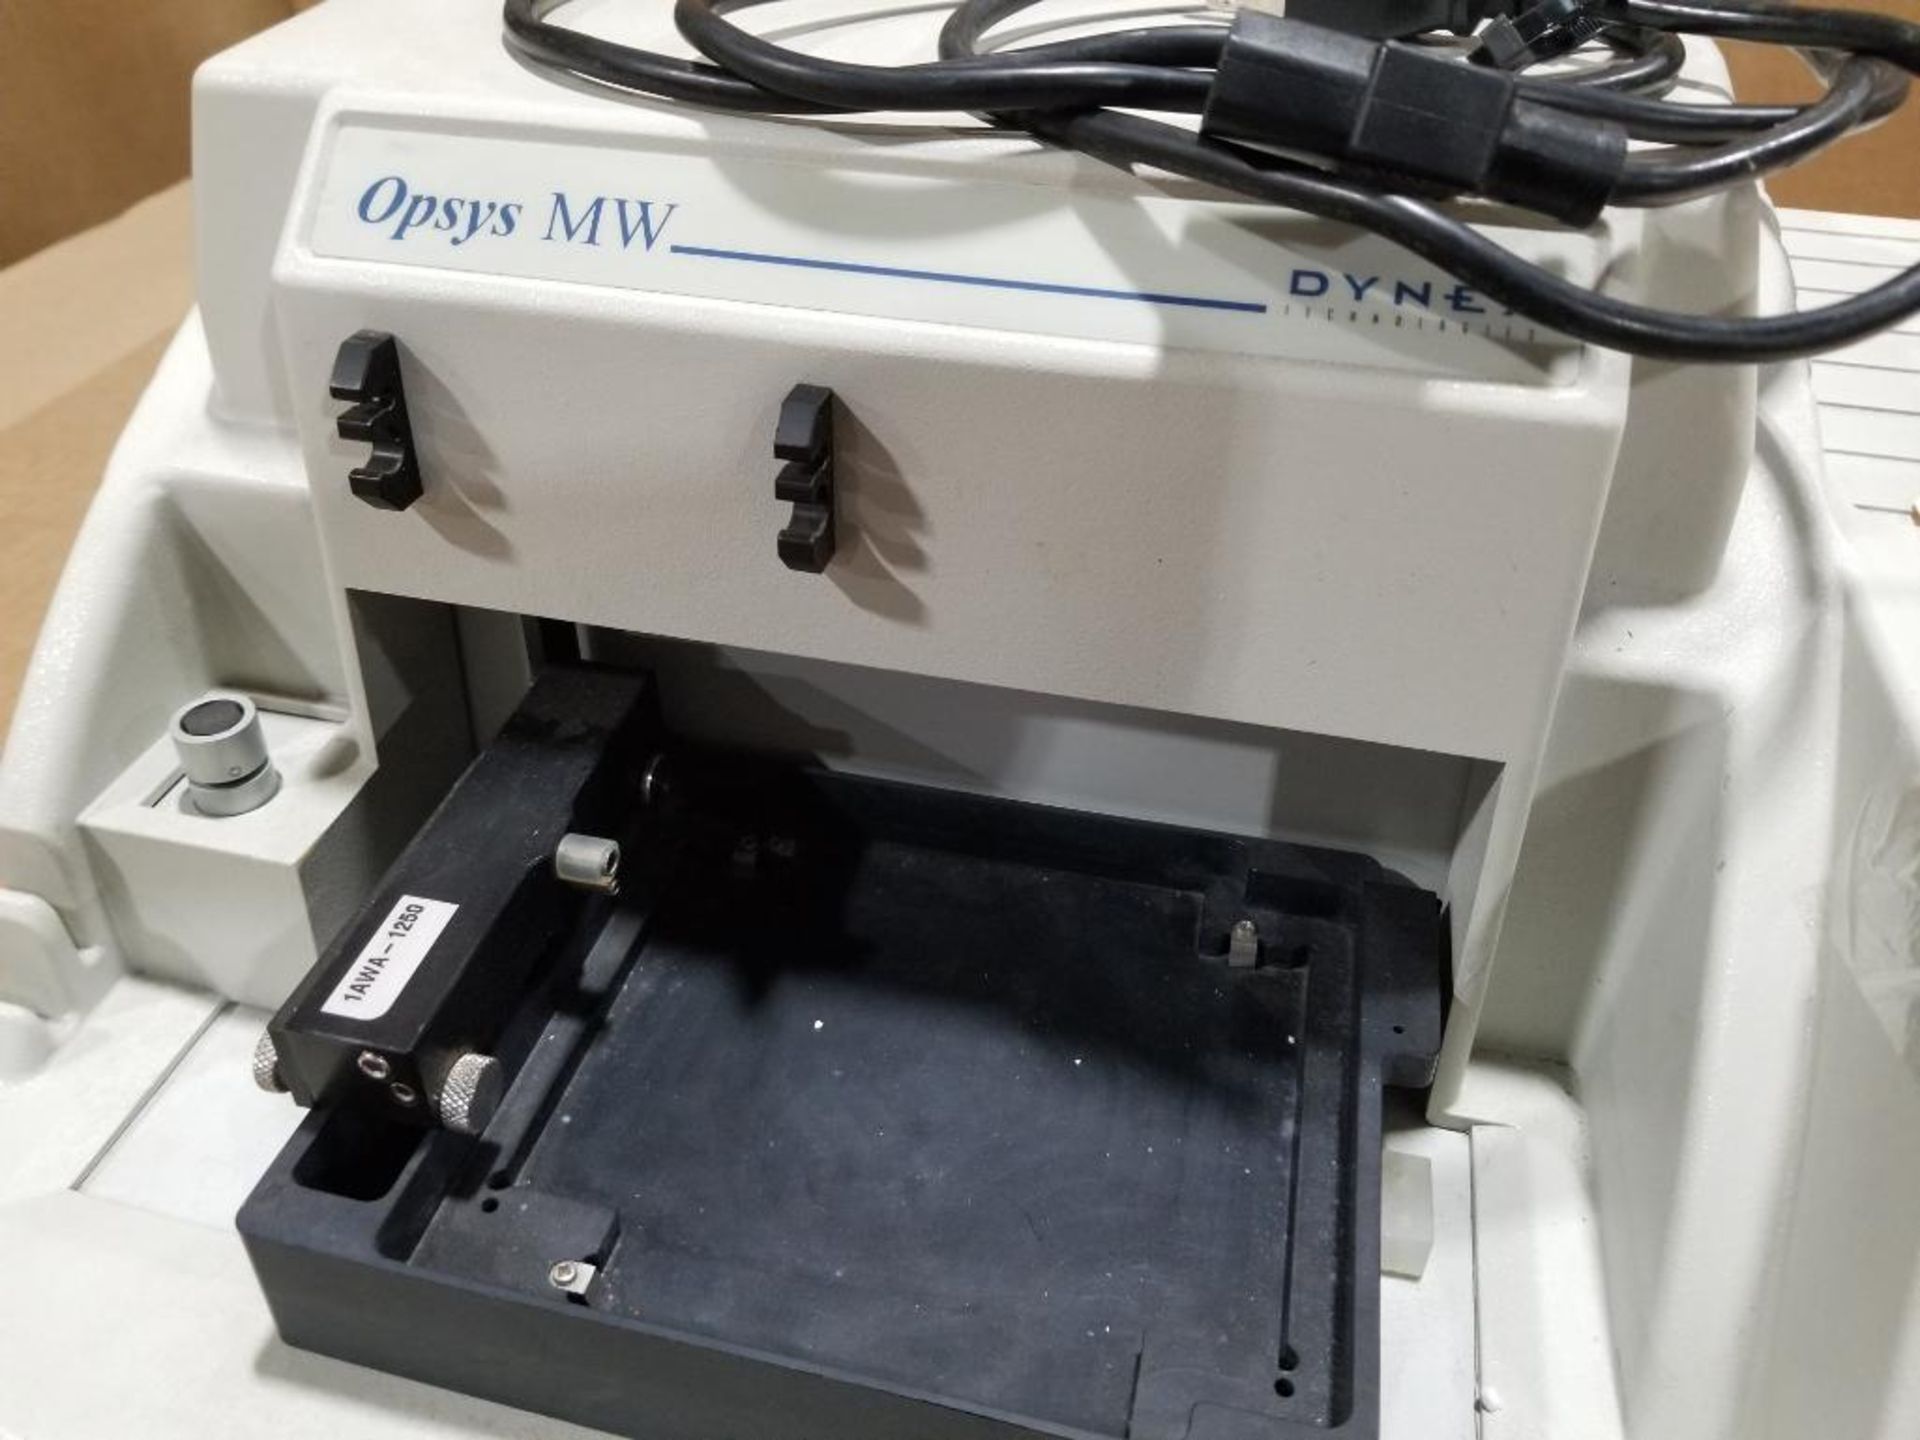 Dynex Opsys MW micro plate washer. - Image 3 of 8